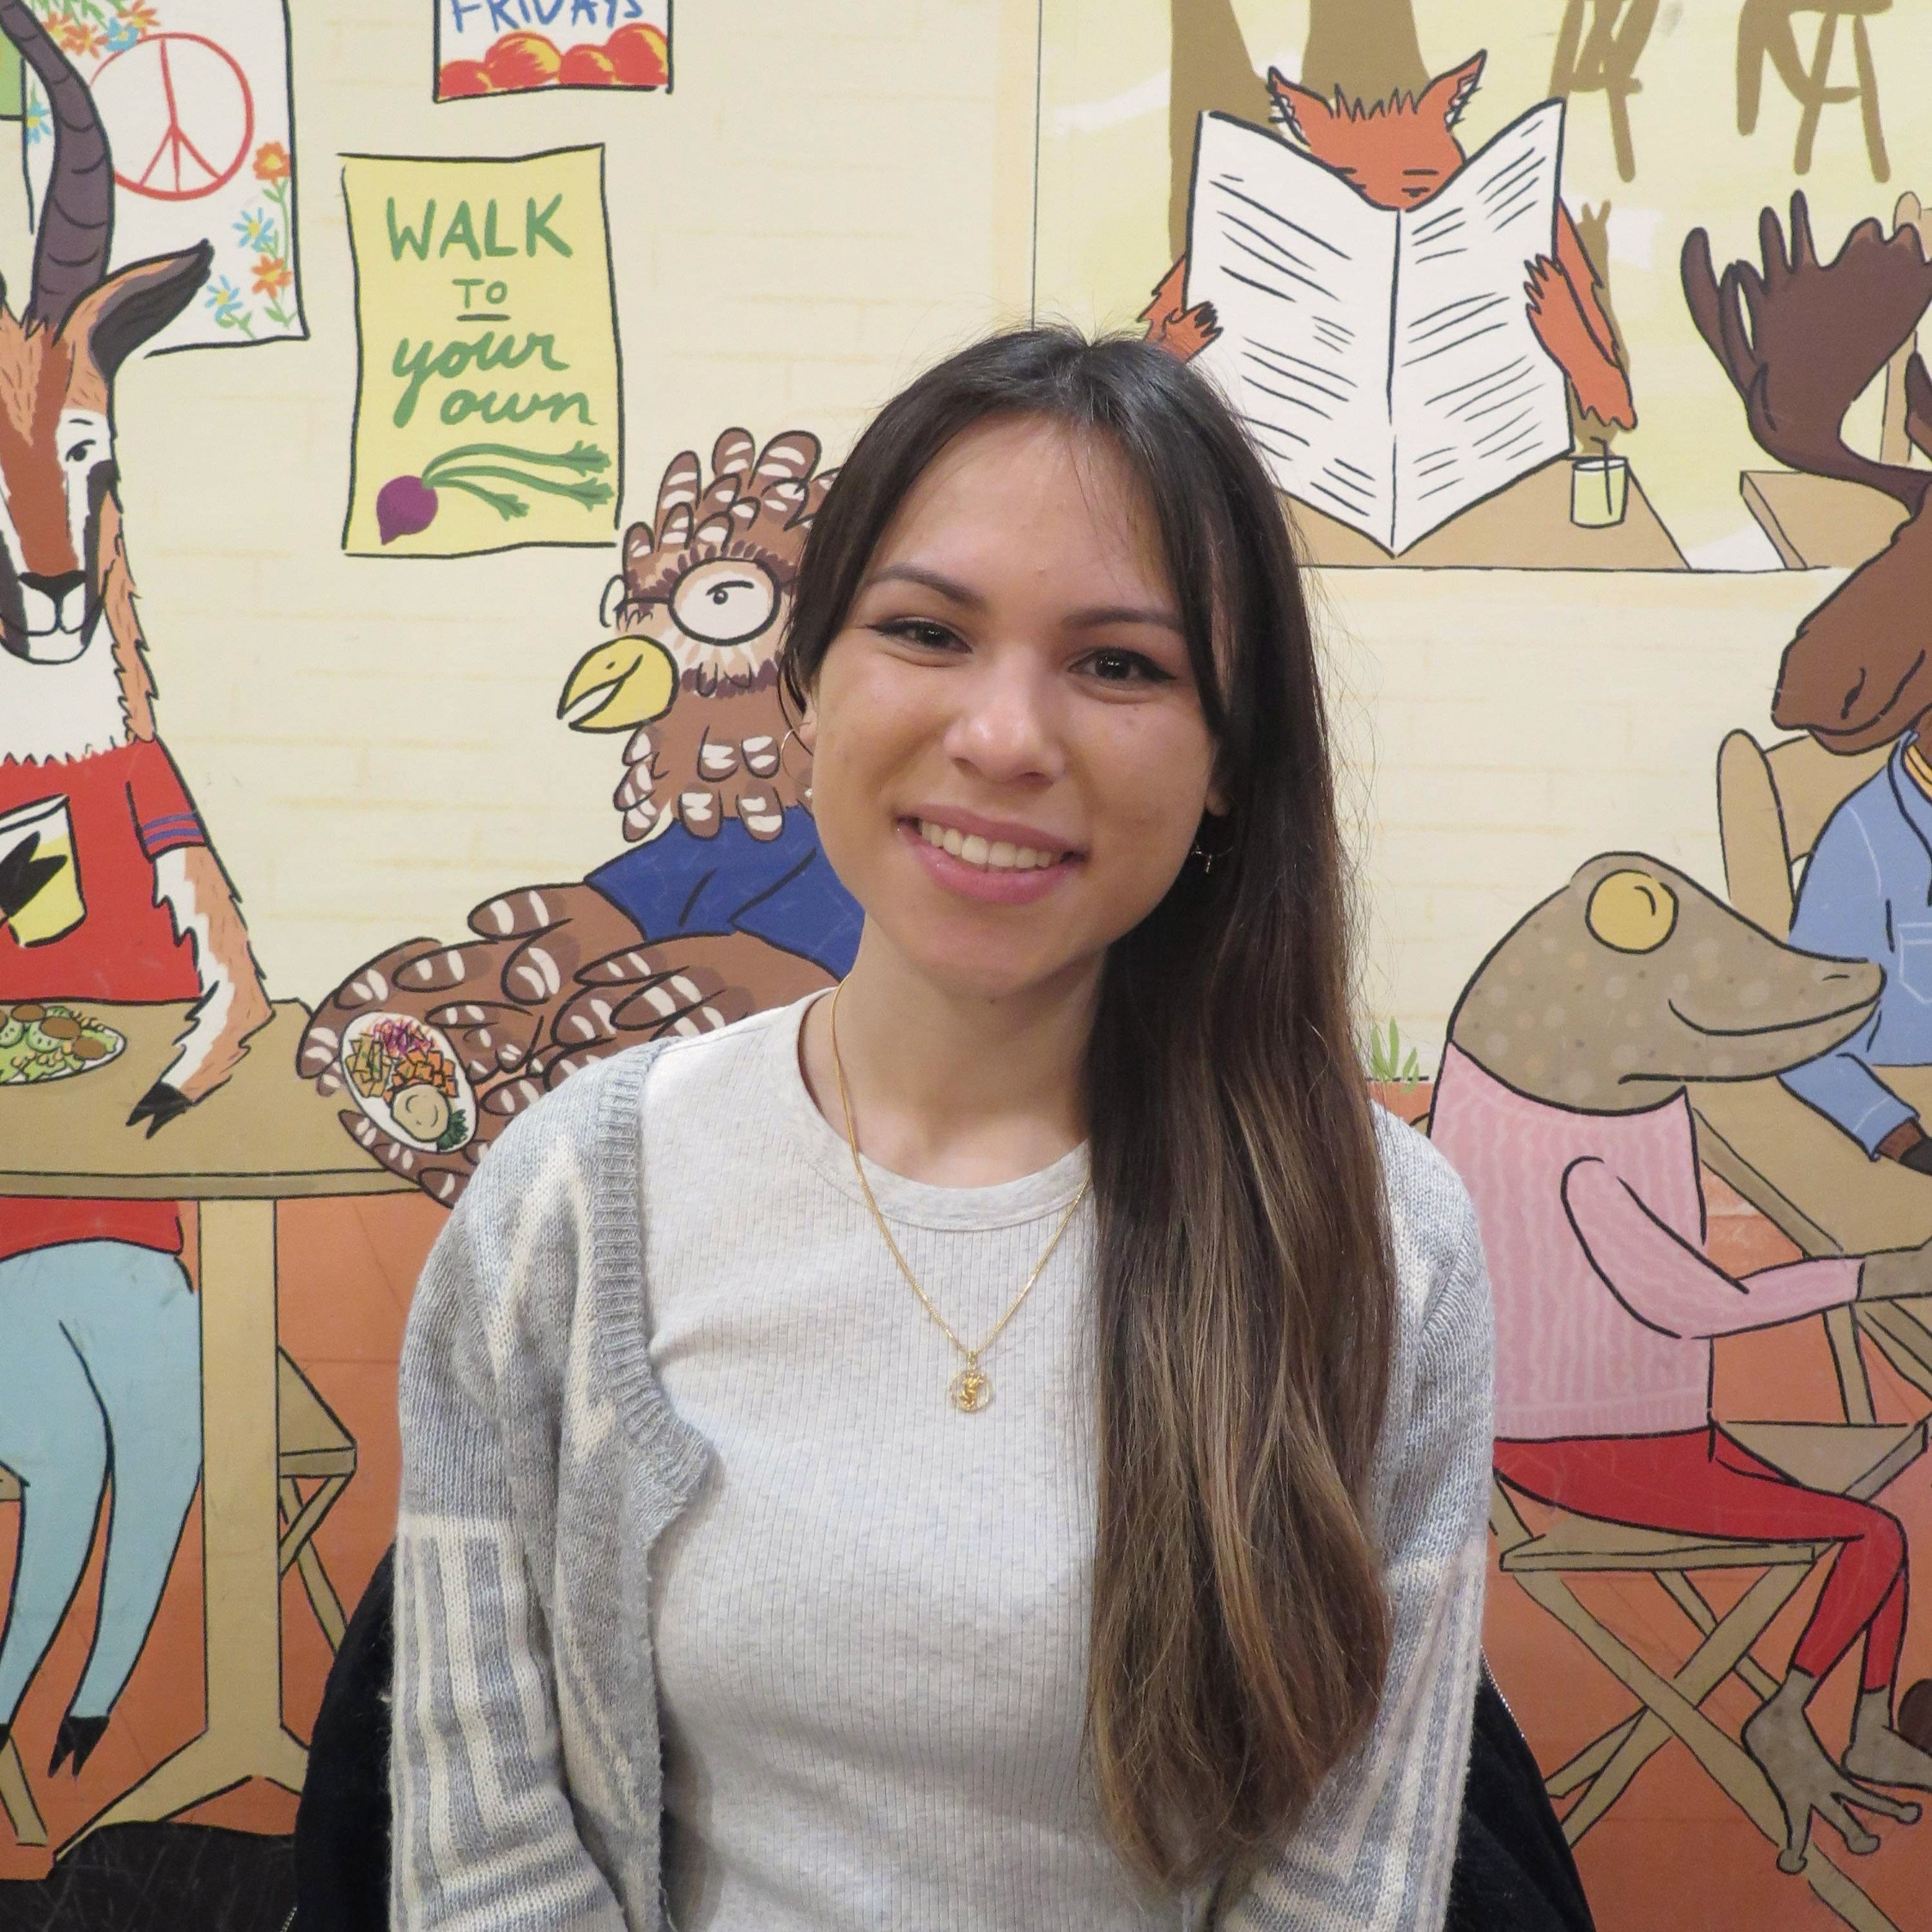 Photo of the author in front of a cartoon mural